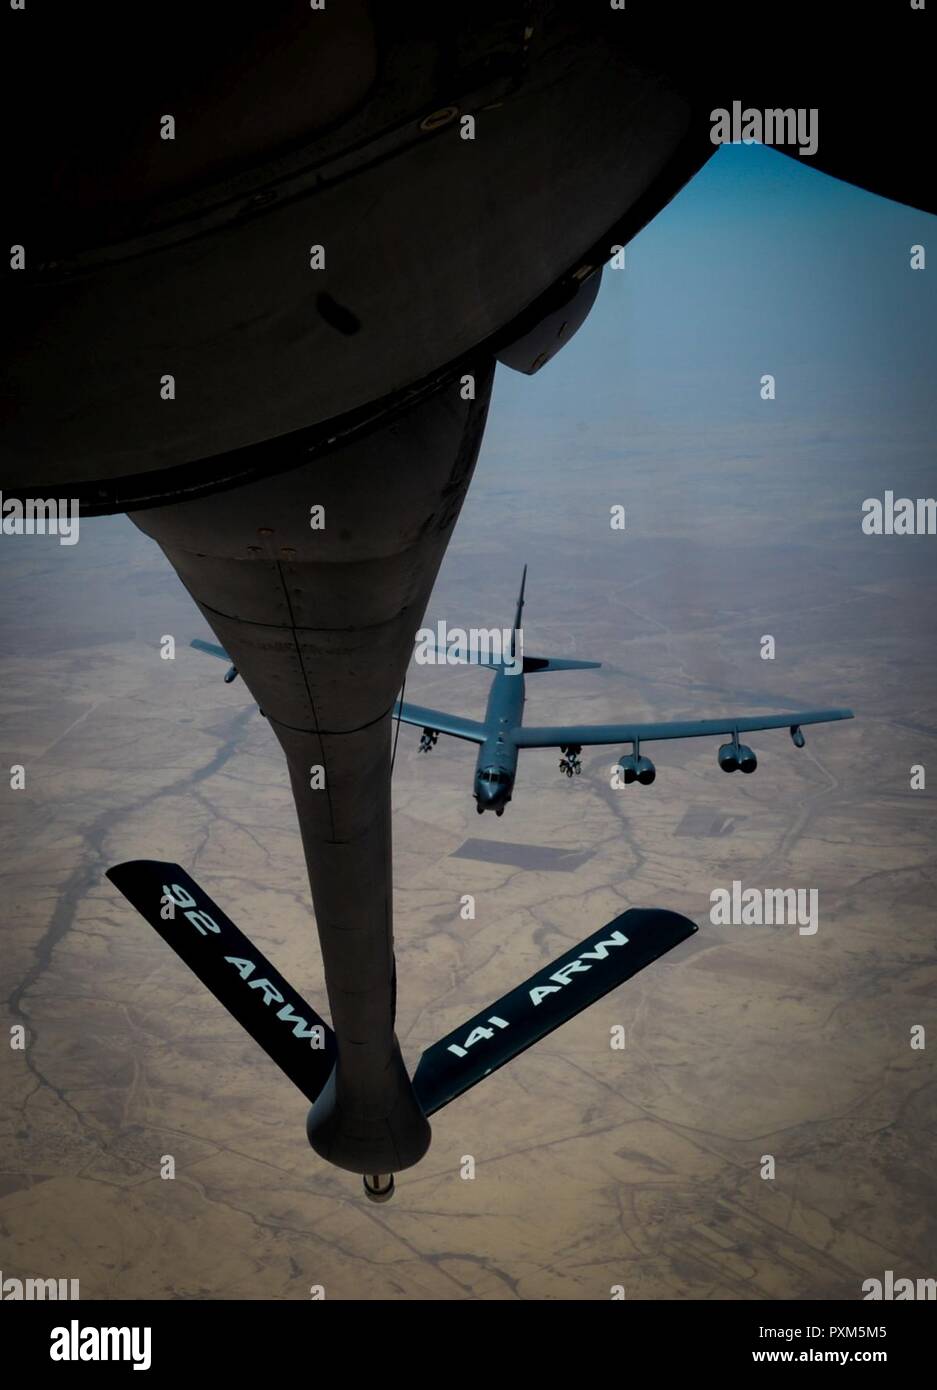 A U.S. Air Force B-52 Stratofortress departs after receiving fuel from a 340th Expeditionary Air Refueling Squadron KC-135 Stratotanker during a flight in support of Operation Inherent Resolve June 9, 2017. Despite being in the Air Force inventory for more than 50 years, B-52s can drop precision-guided weapons. The aircraft's payload capacity of 70,000 pounds can include gravity bombs, cluster bombs, precision-guided missiles and Joint Direct Attack Munitions. Stock Photo